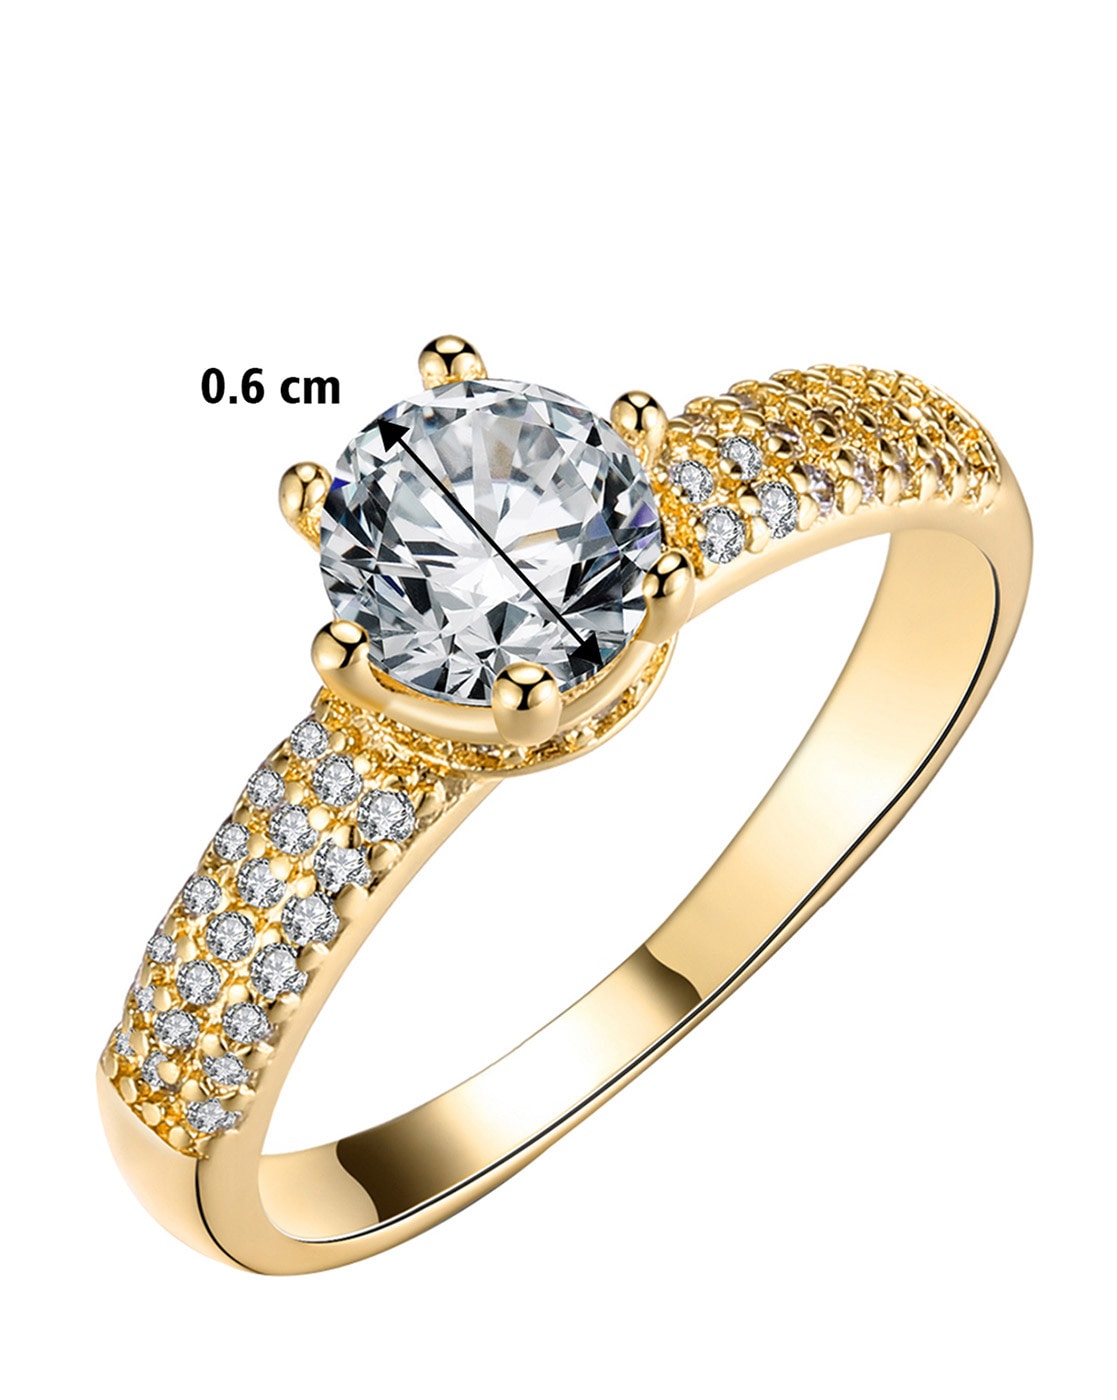 CC Rings for Men Luxury Fashion Jewelry 24K Gold Plated Ring Cubic Zirconia  Brid | eBay